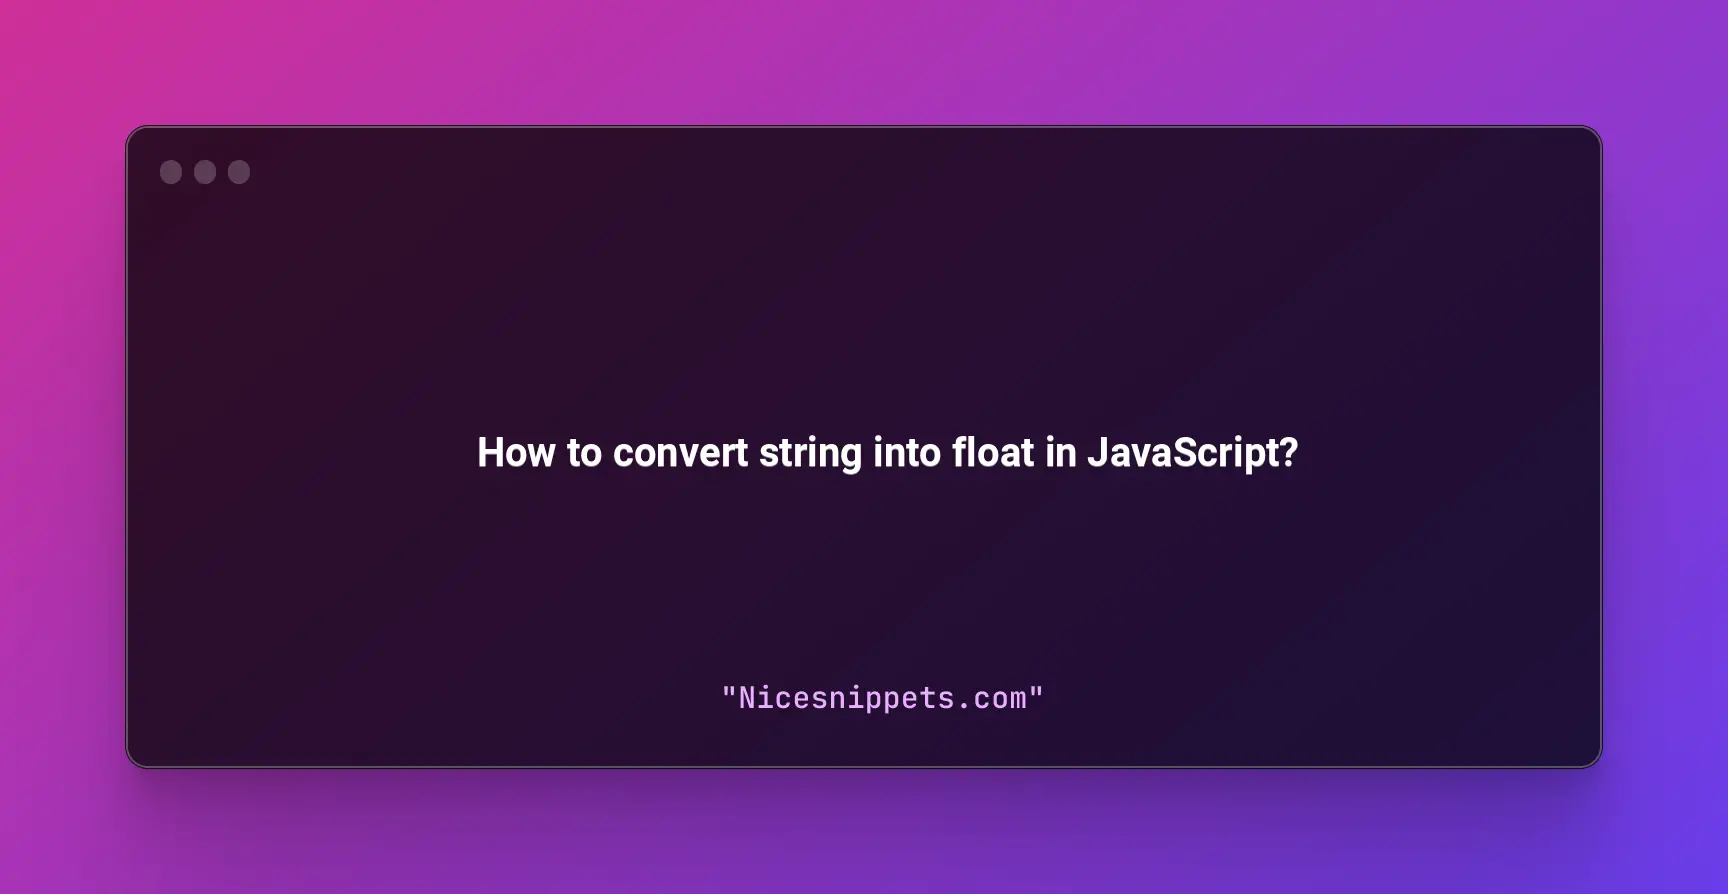 How to convert string into float in JavaScript?